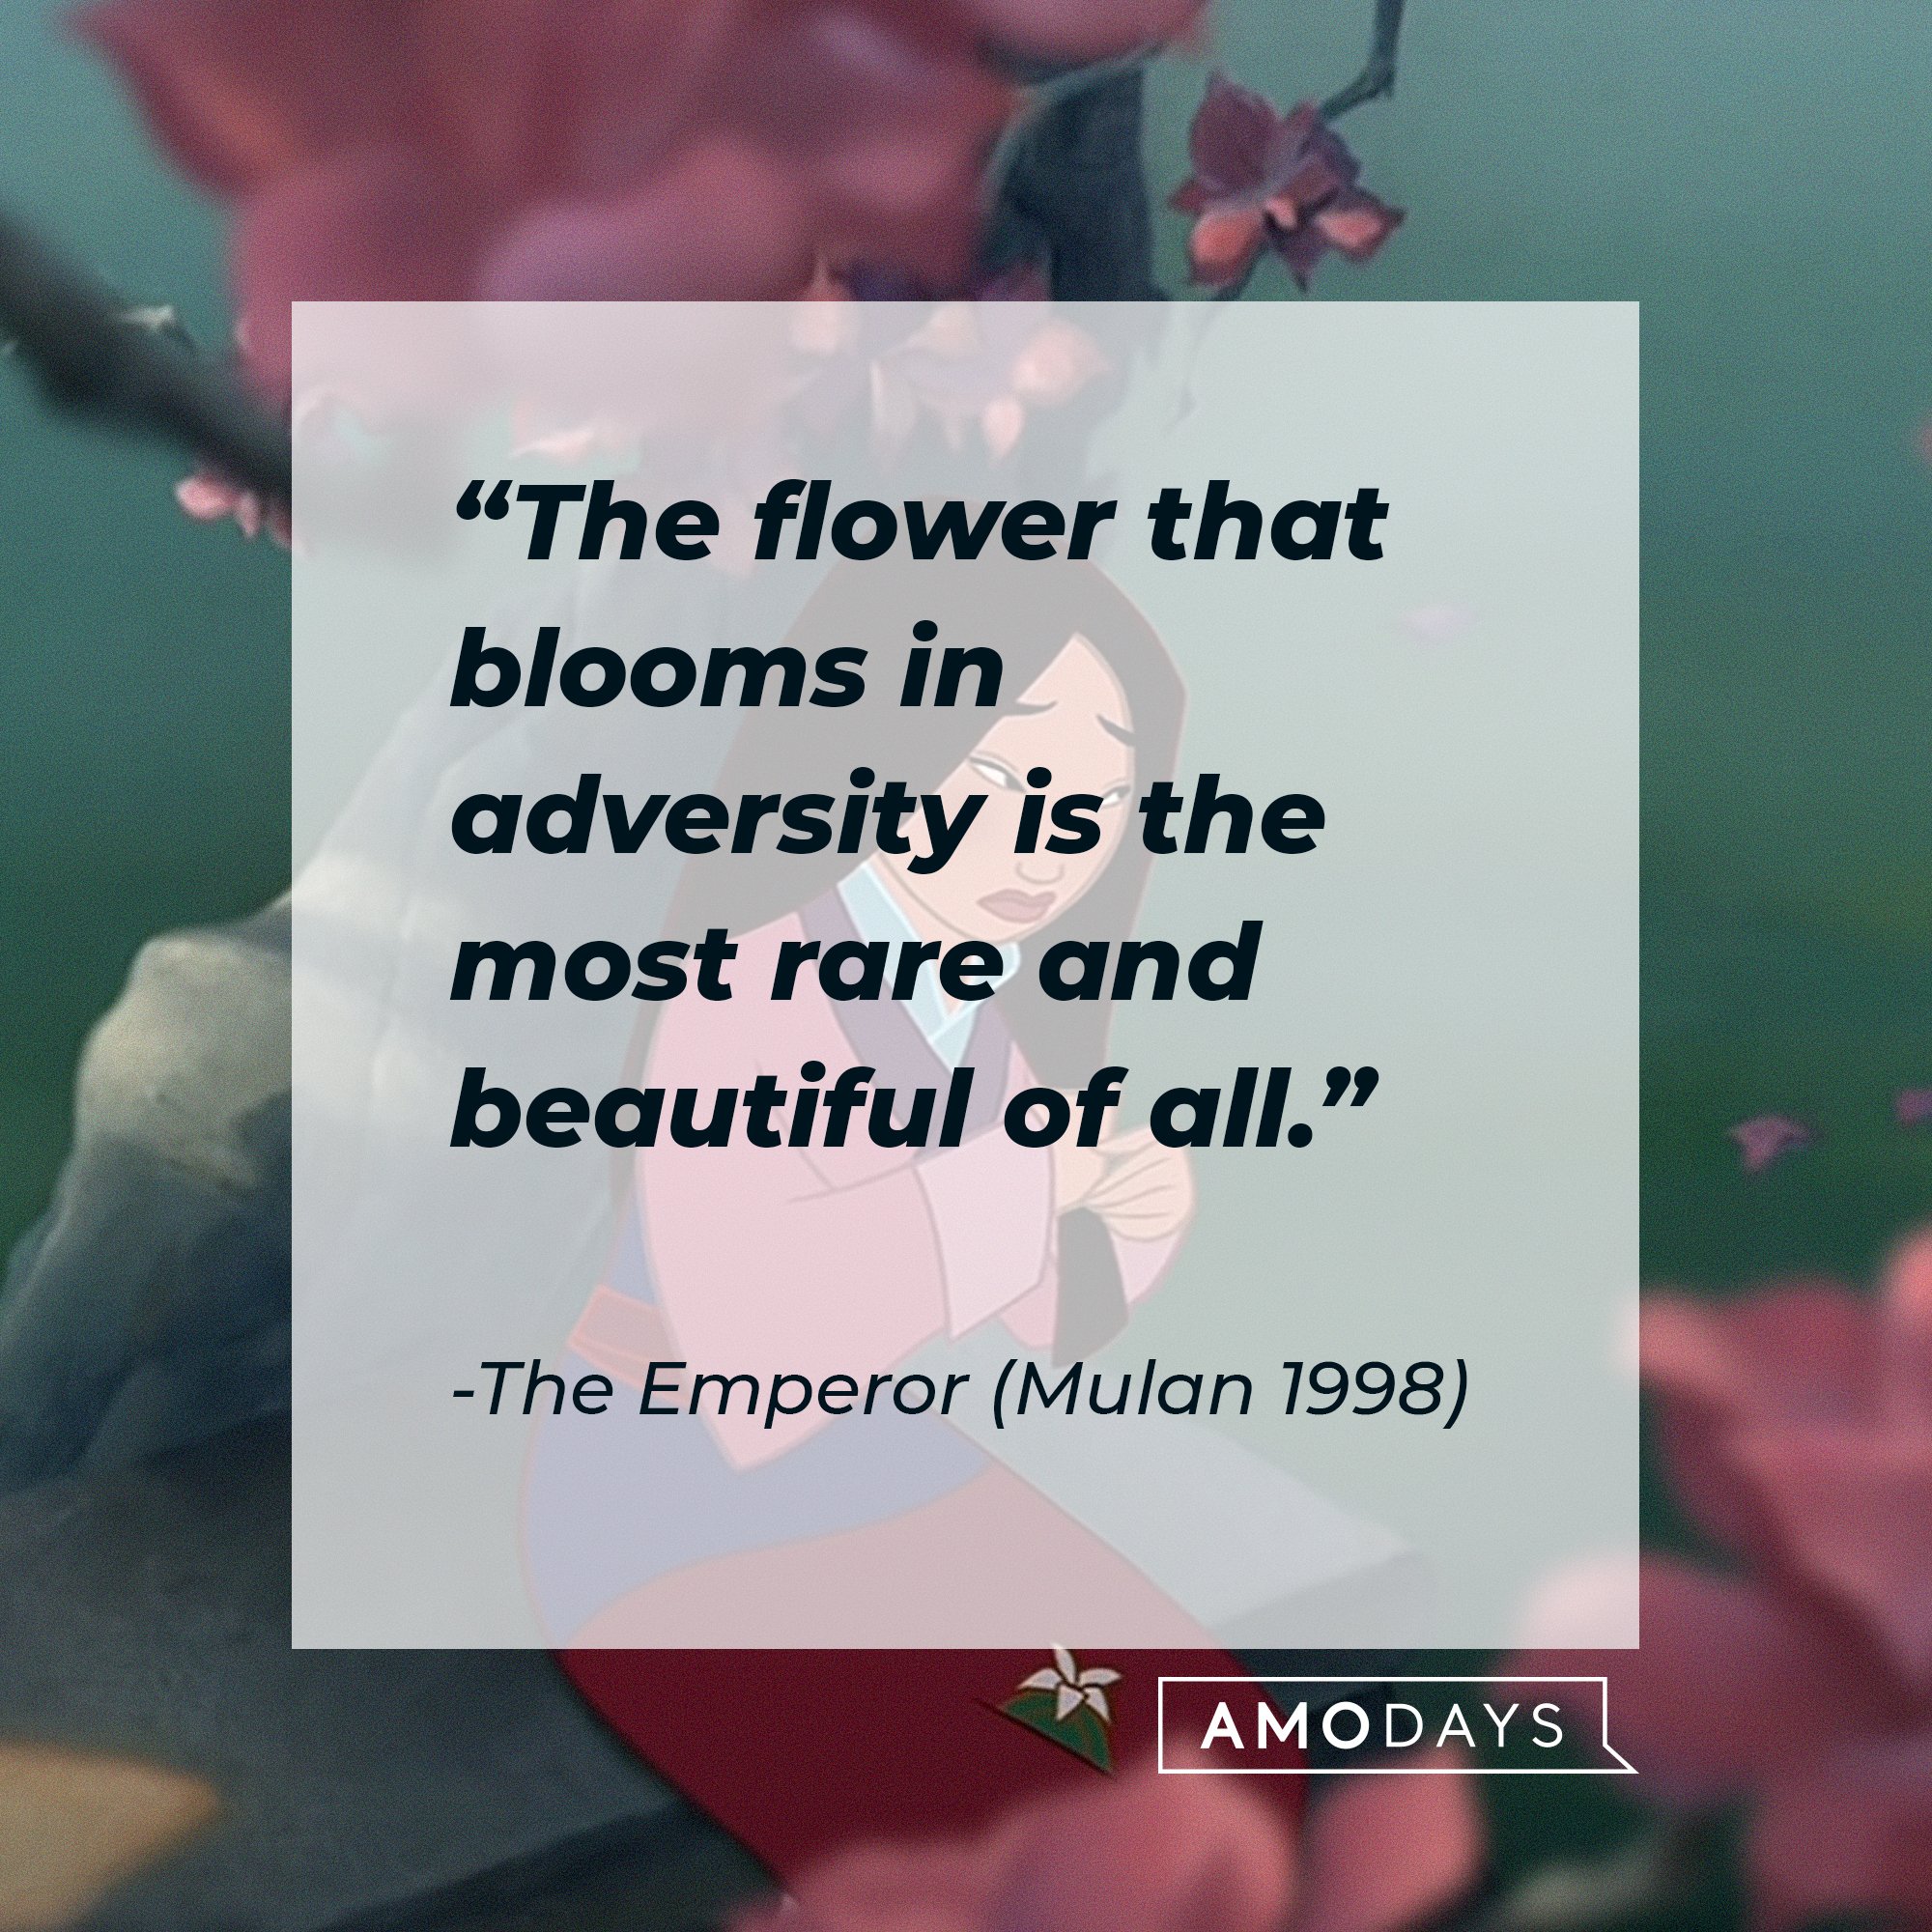 The Emperor’s quote: “The flower that blooms in adversity is the most rare and beautiful of all.” | Image: AmoDays